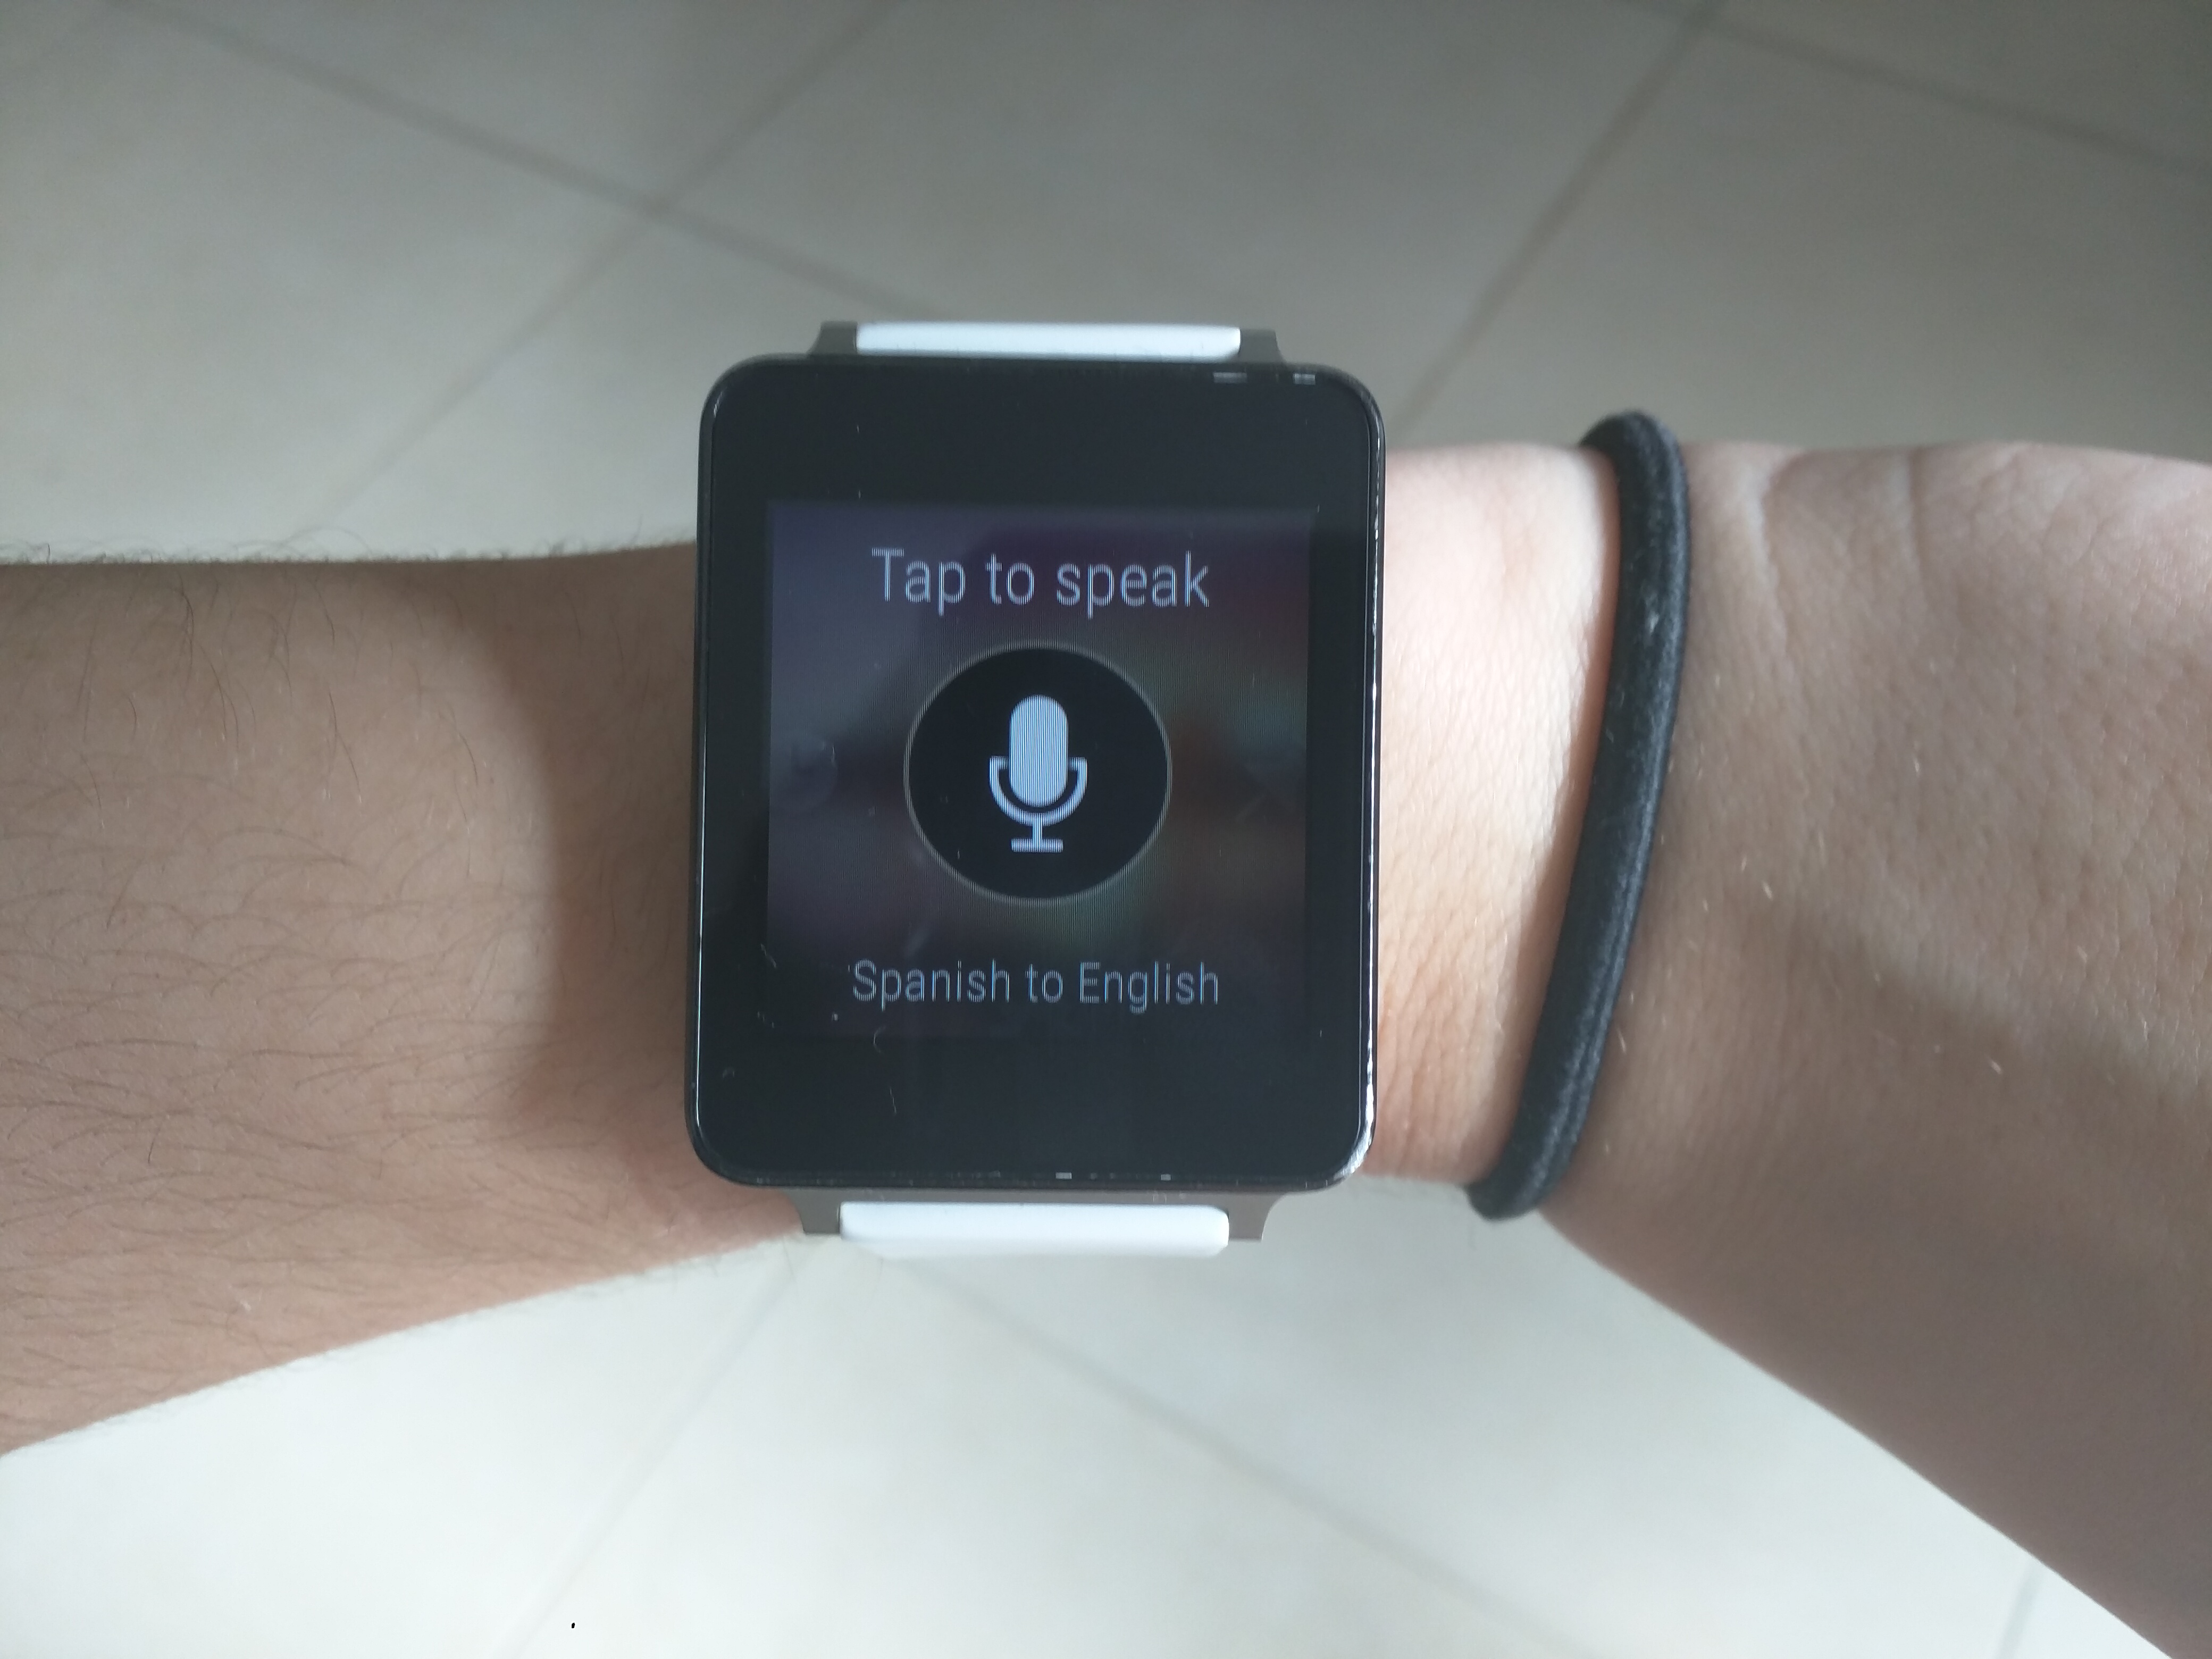 Usar traductor Microsoft en Android Wear facil